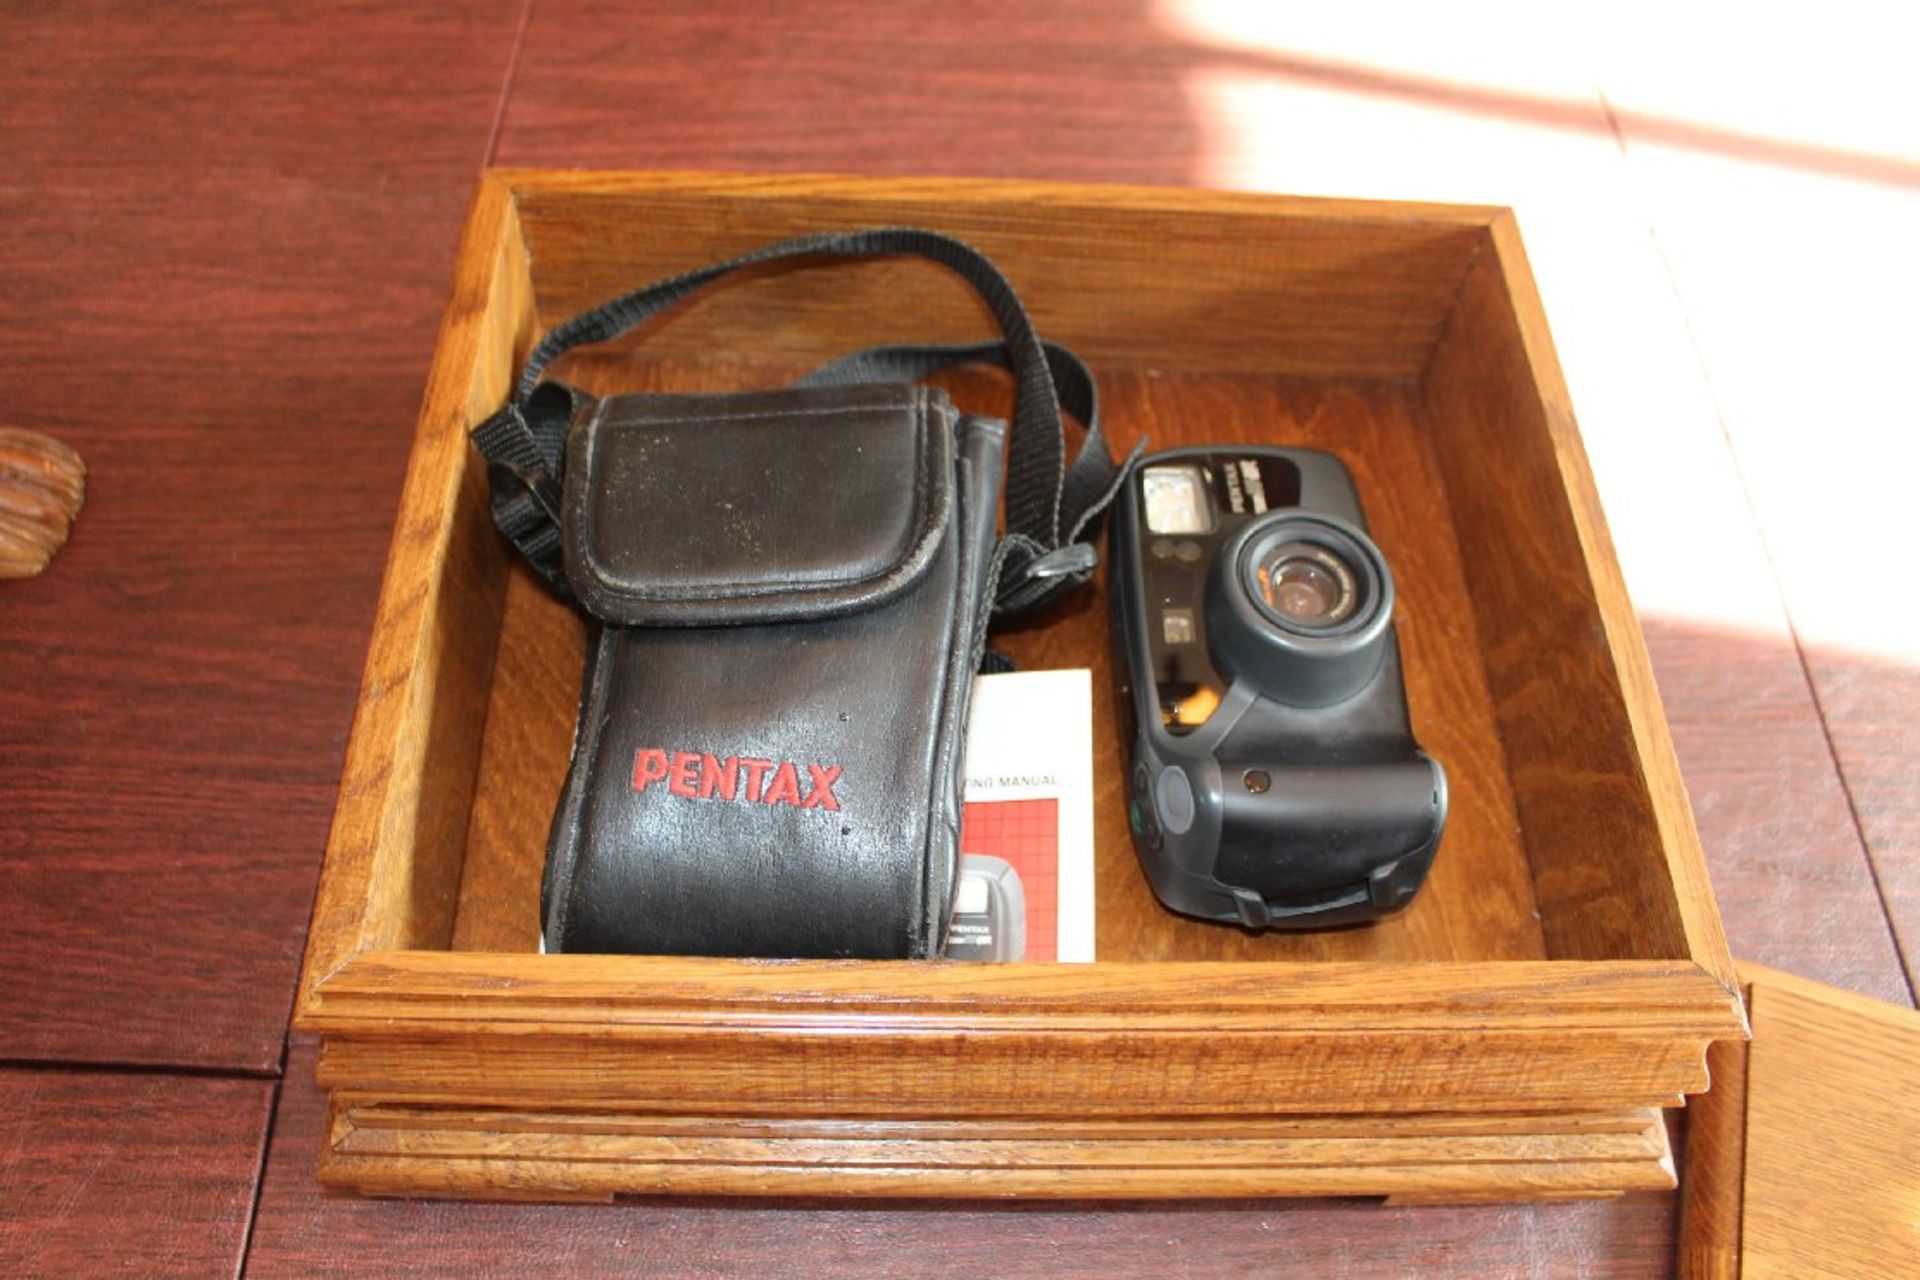 Carved Wooden Bear with Salmon in Mouth, Wooden Flatware Box, Pentax Camera - Image 3 of 5